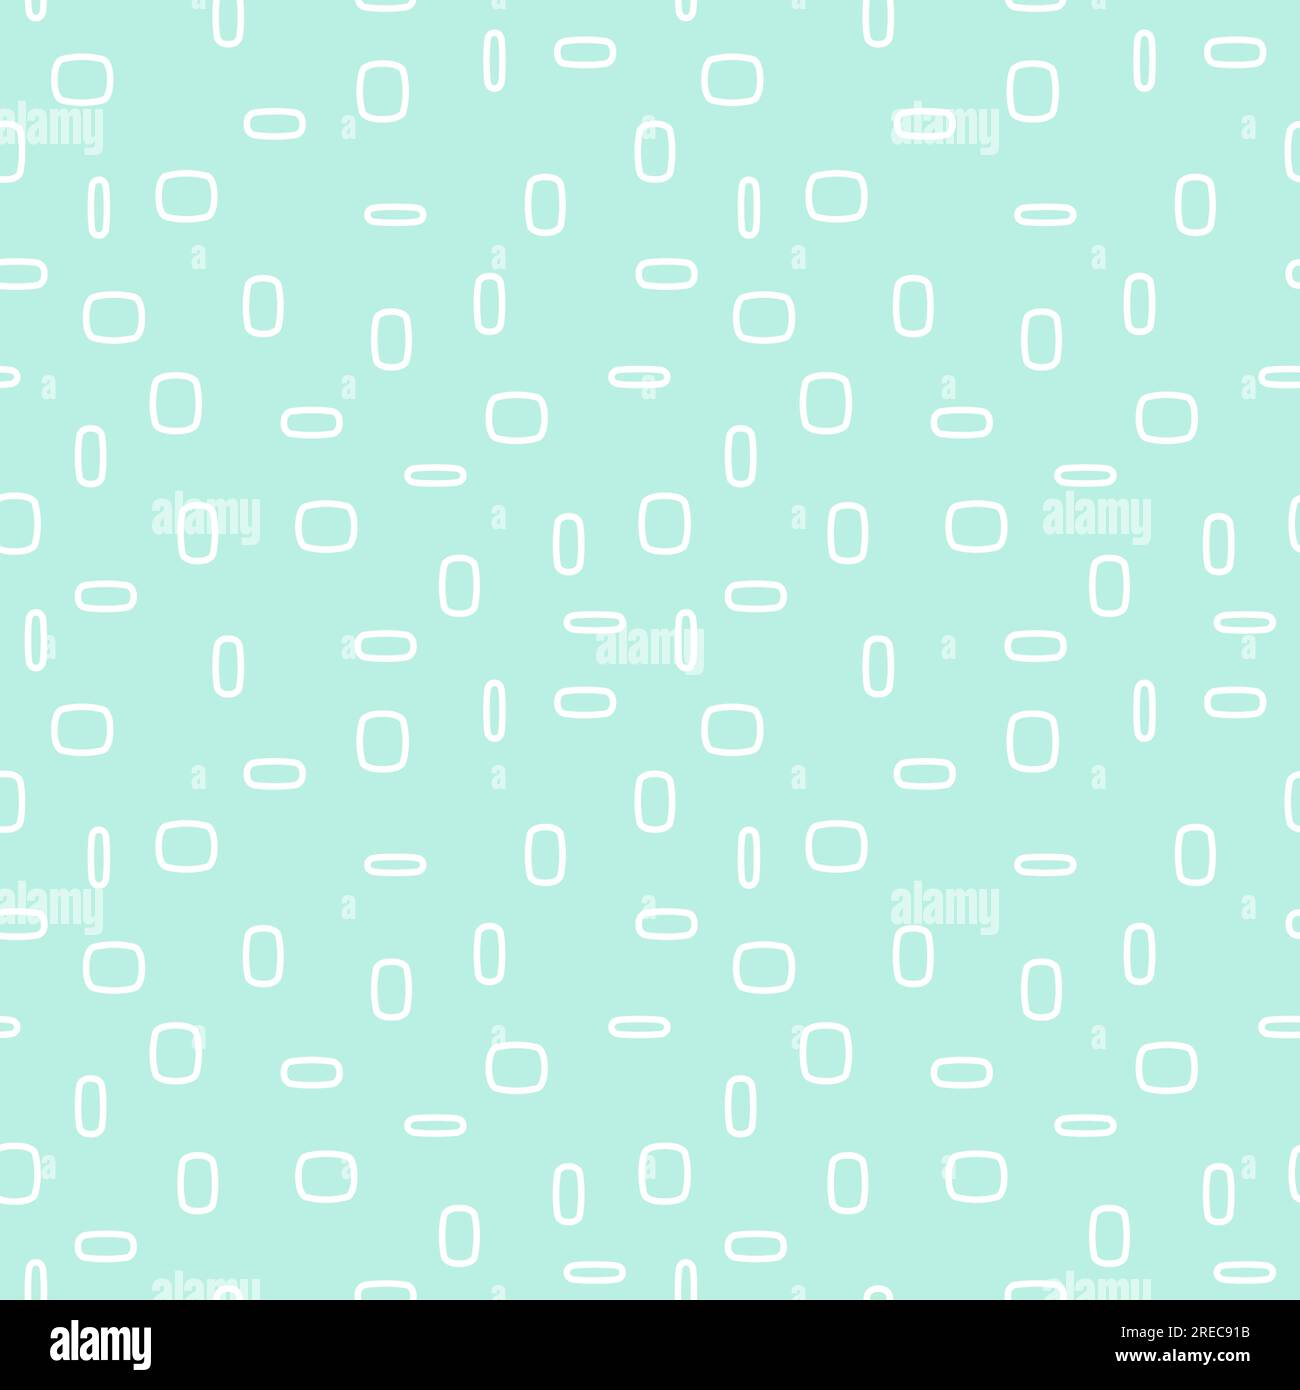 Light mint green Stock Vector Images - Page 2 - Alamy